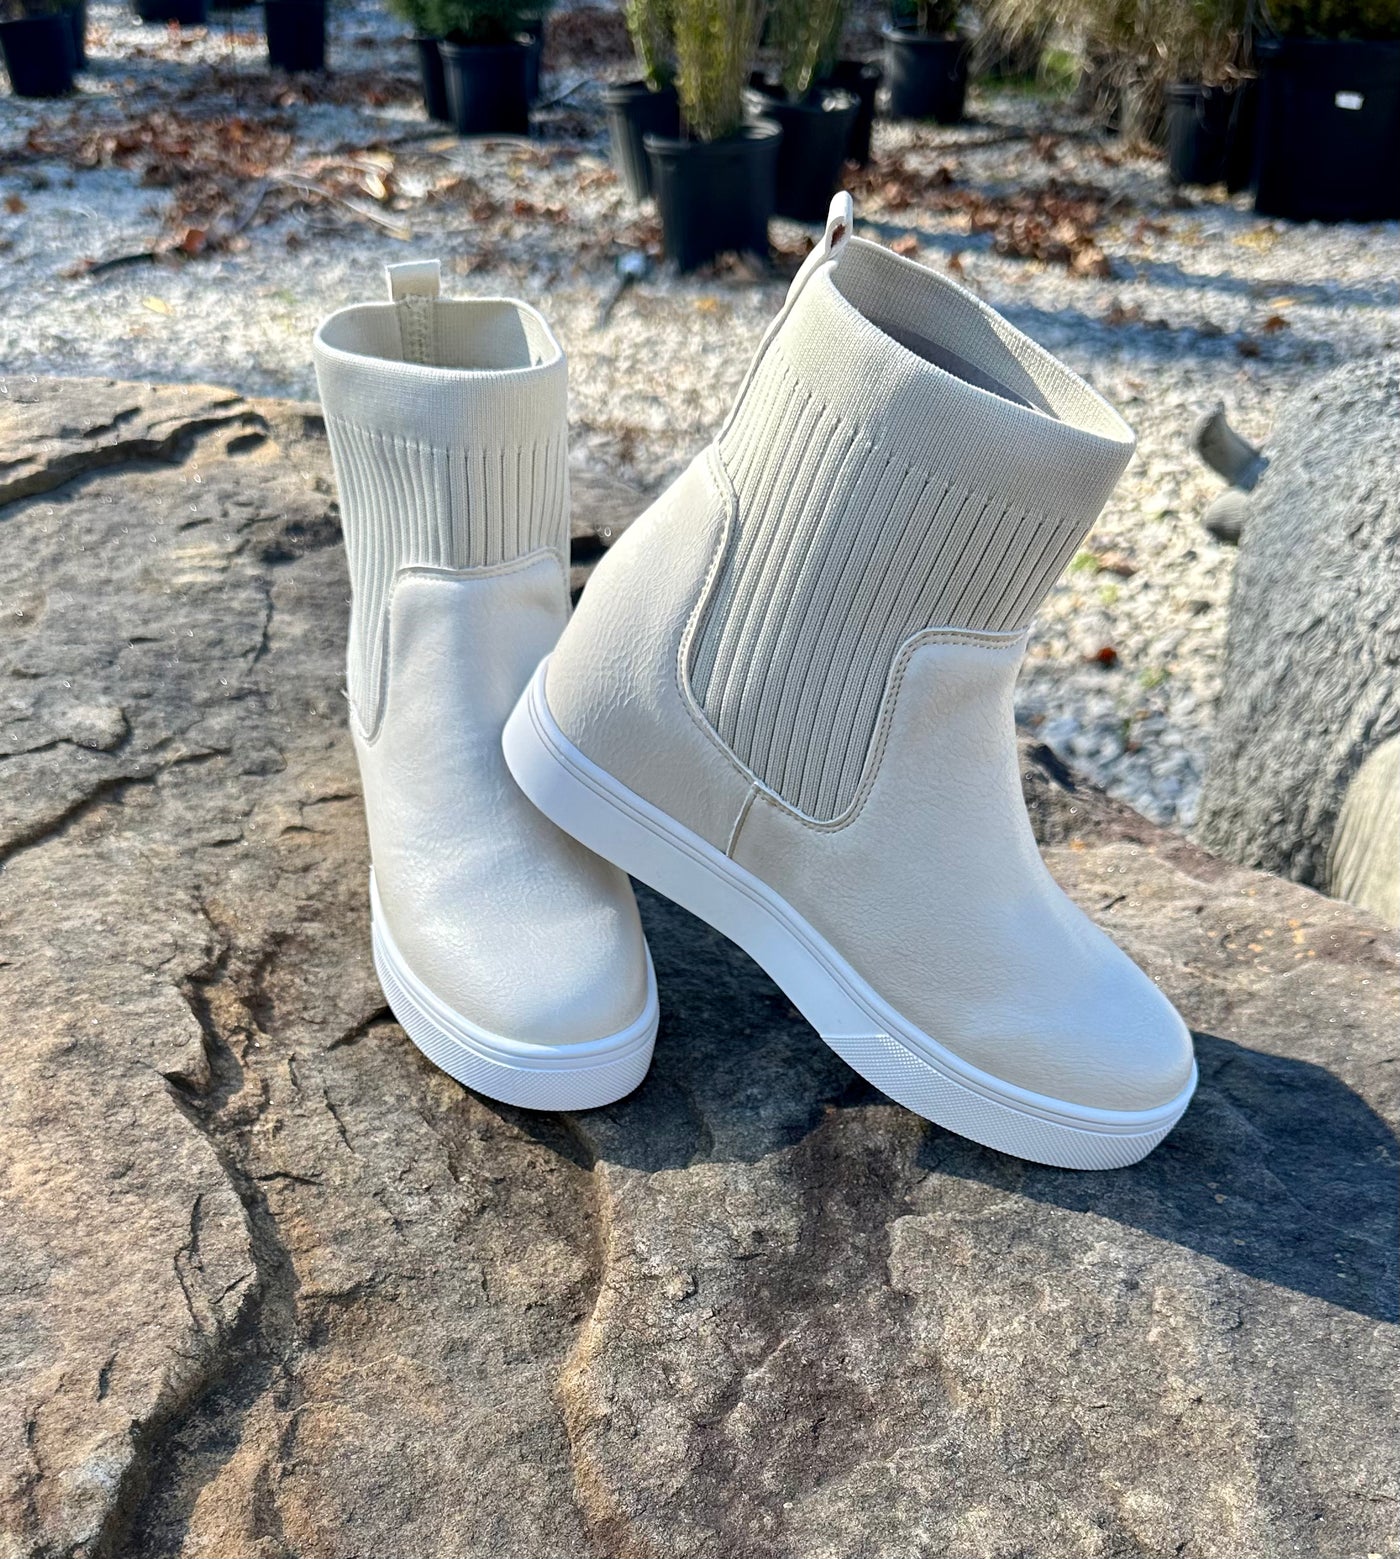 Corkys "Sweater Weather" Boots in Ivory Final Sale